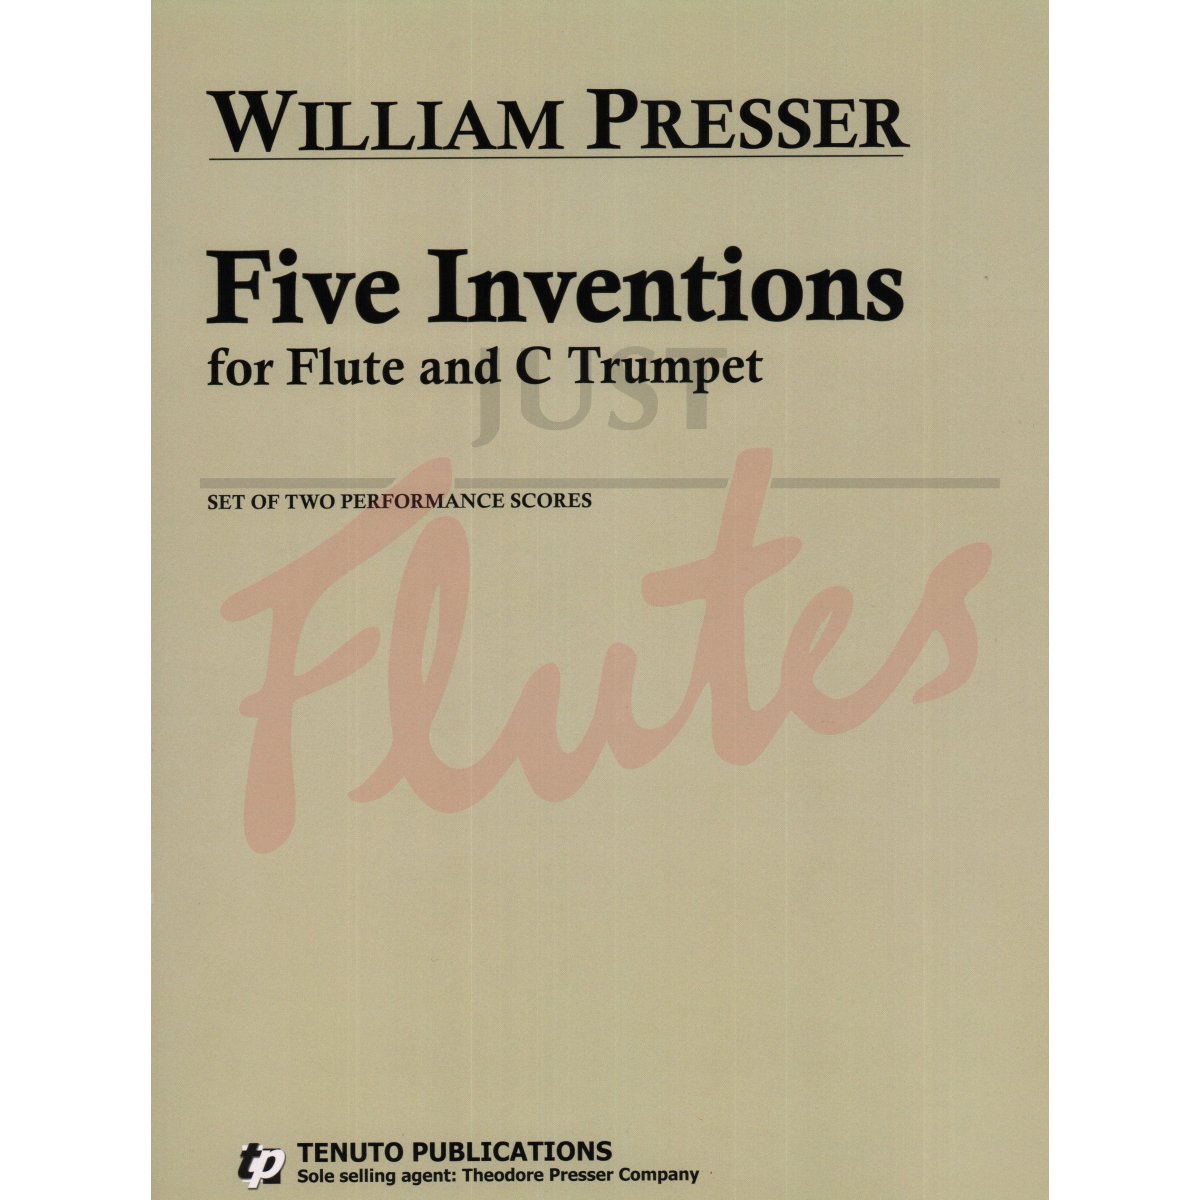 Five Inventions for Flute and C Trumpet